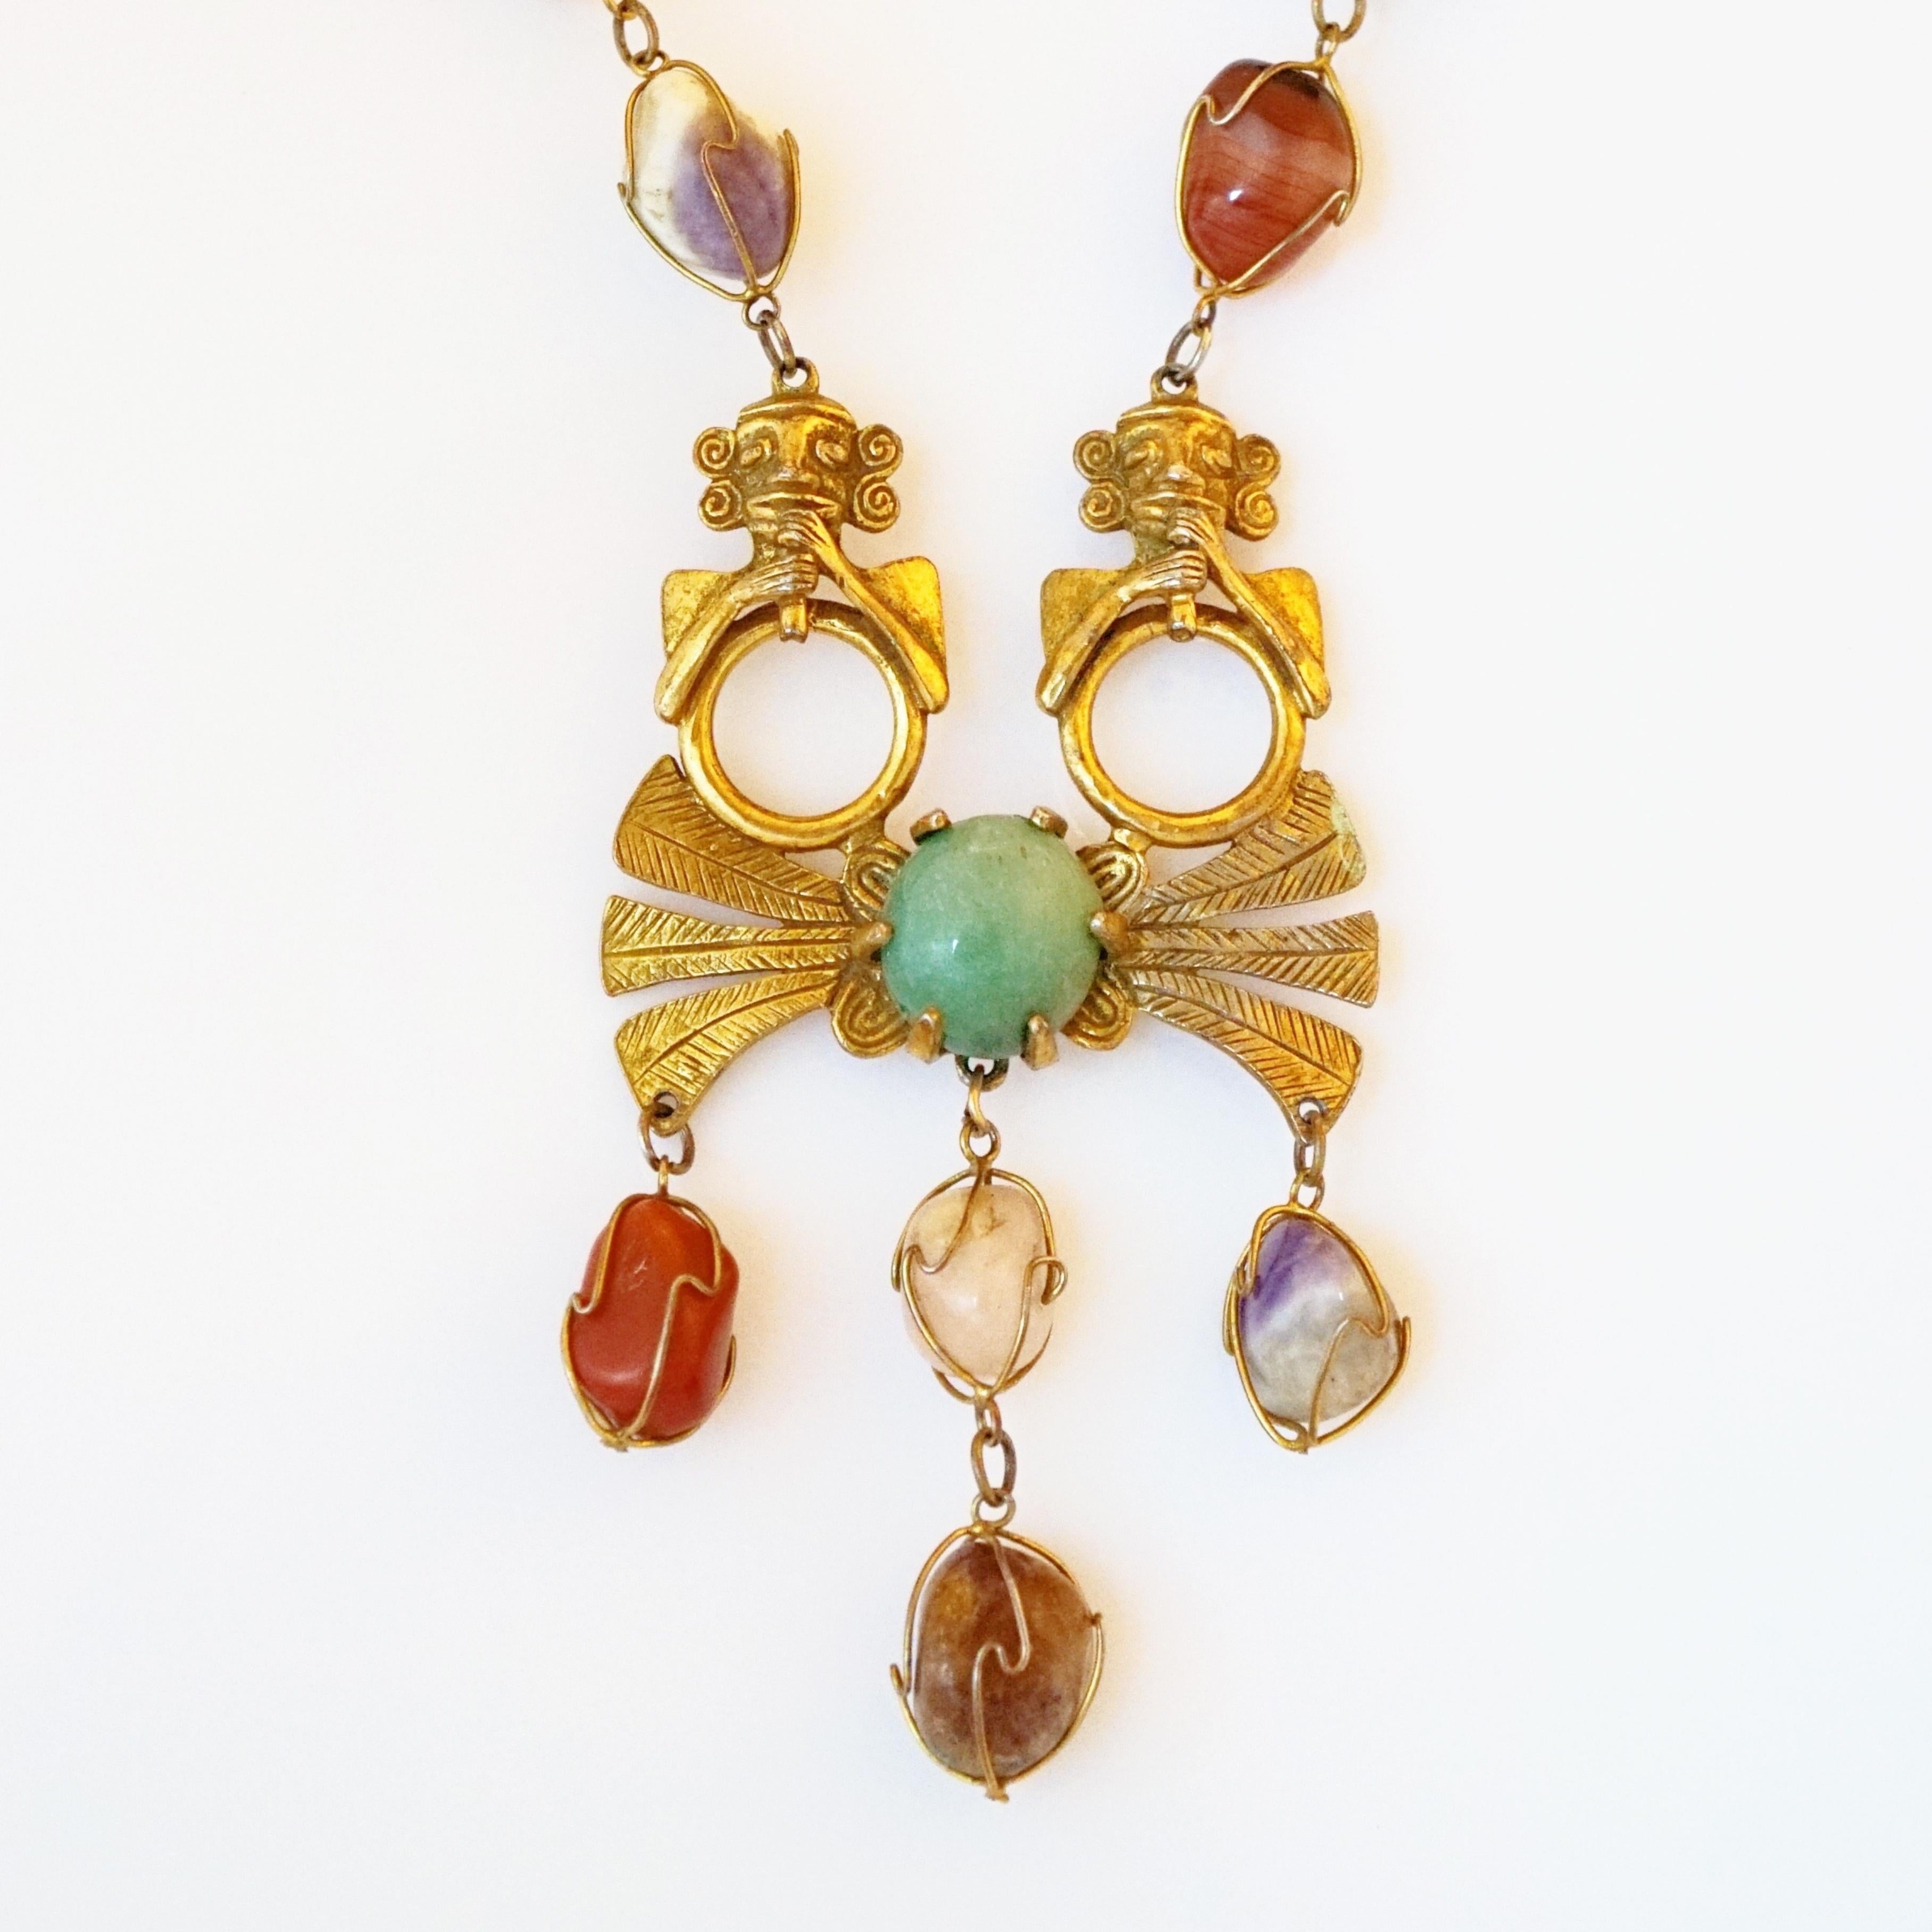 Mayan Statement Necklace With Caged Gems By Larry Vrba For Castlecliff, 1970s In Good Condition For Sale In McKinney, TX